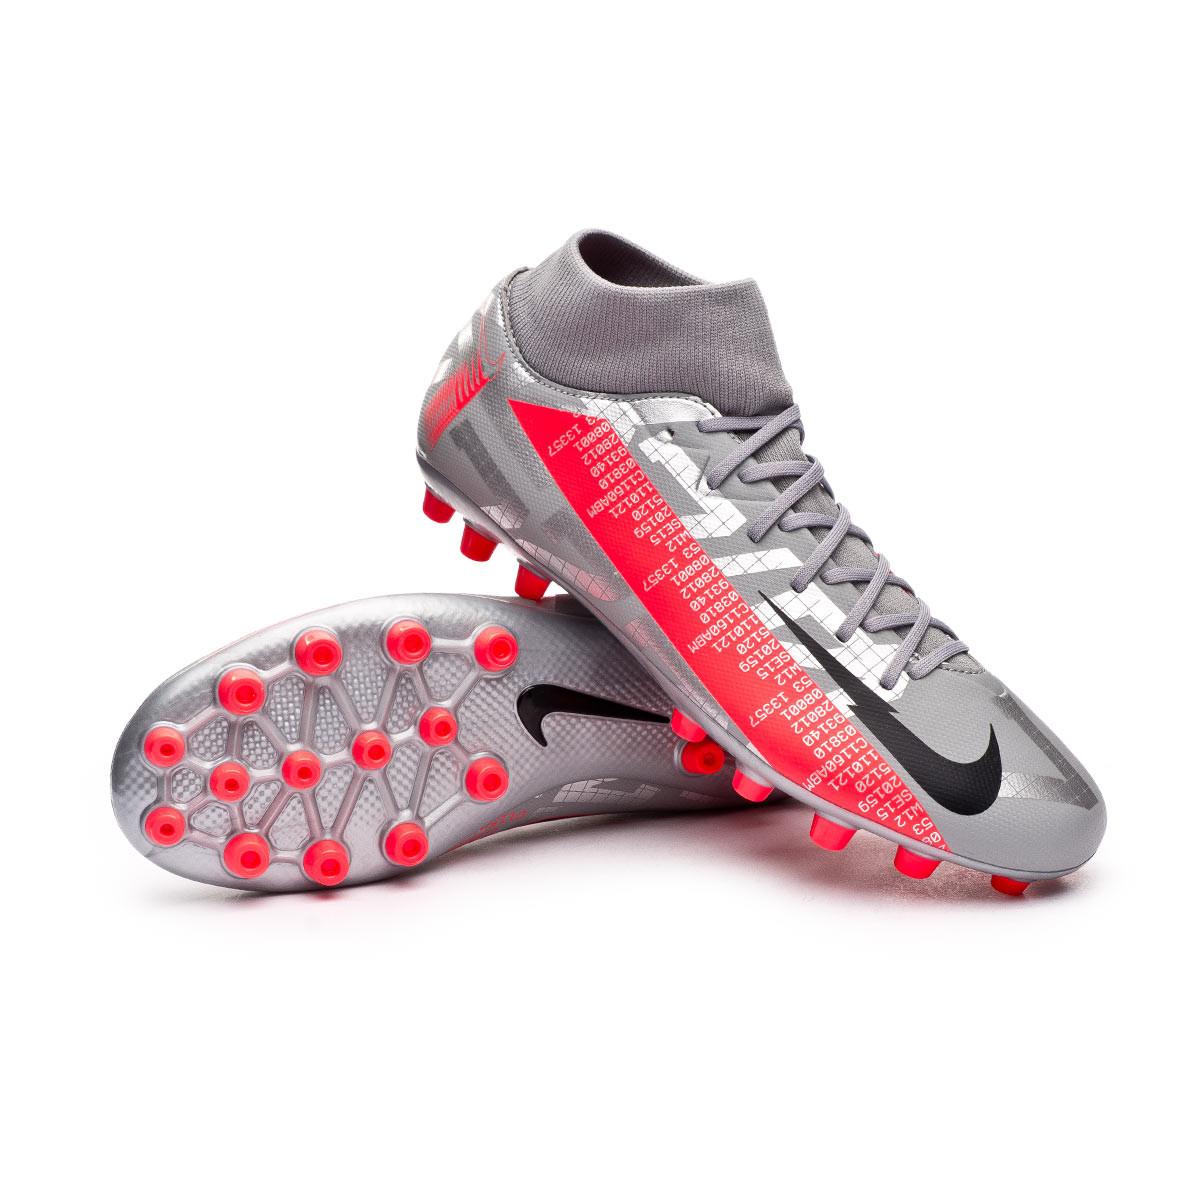 nike mercurial superfly vii academy football boots